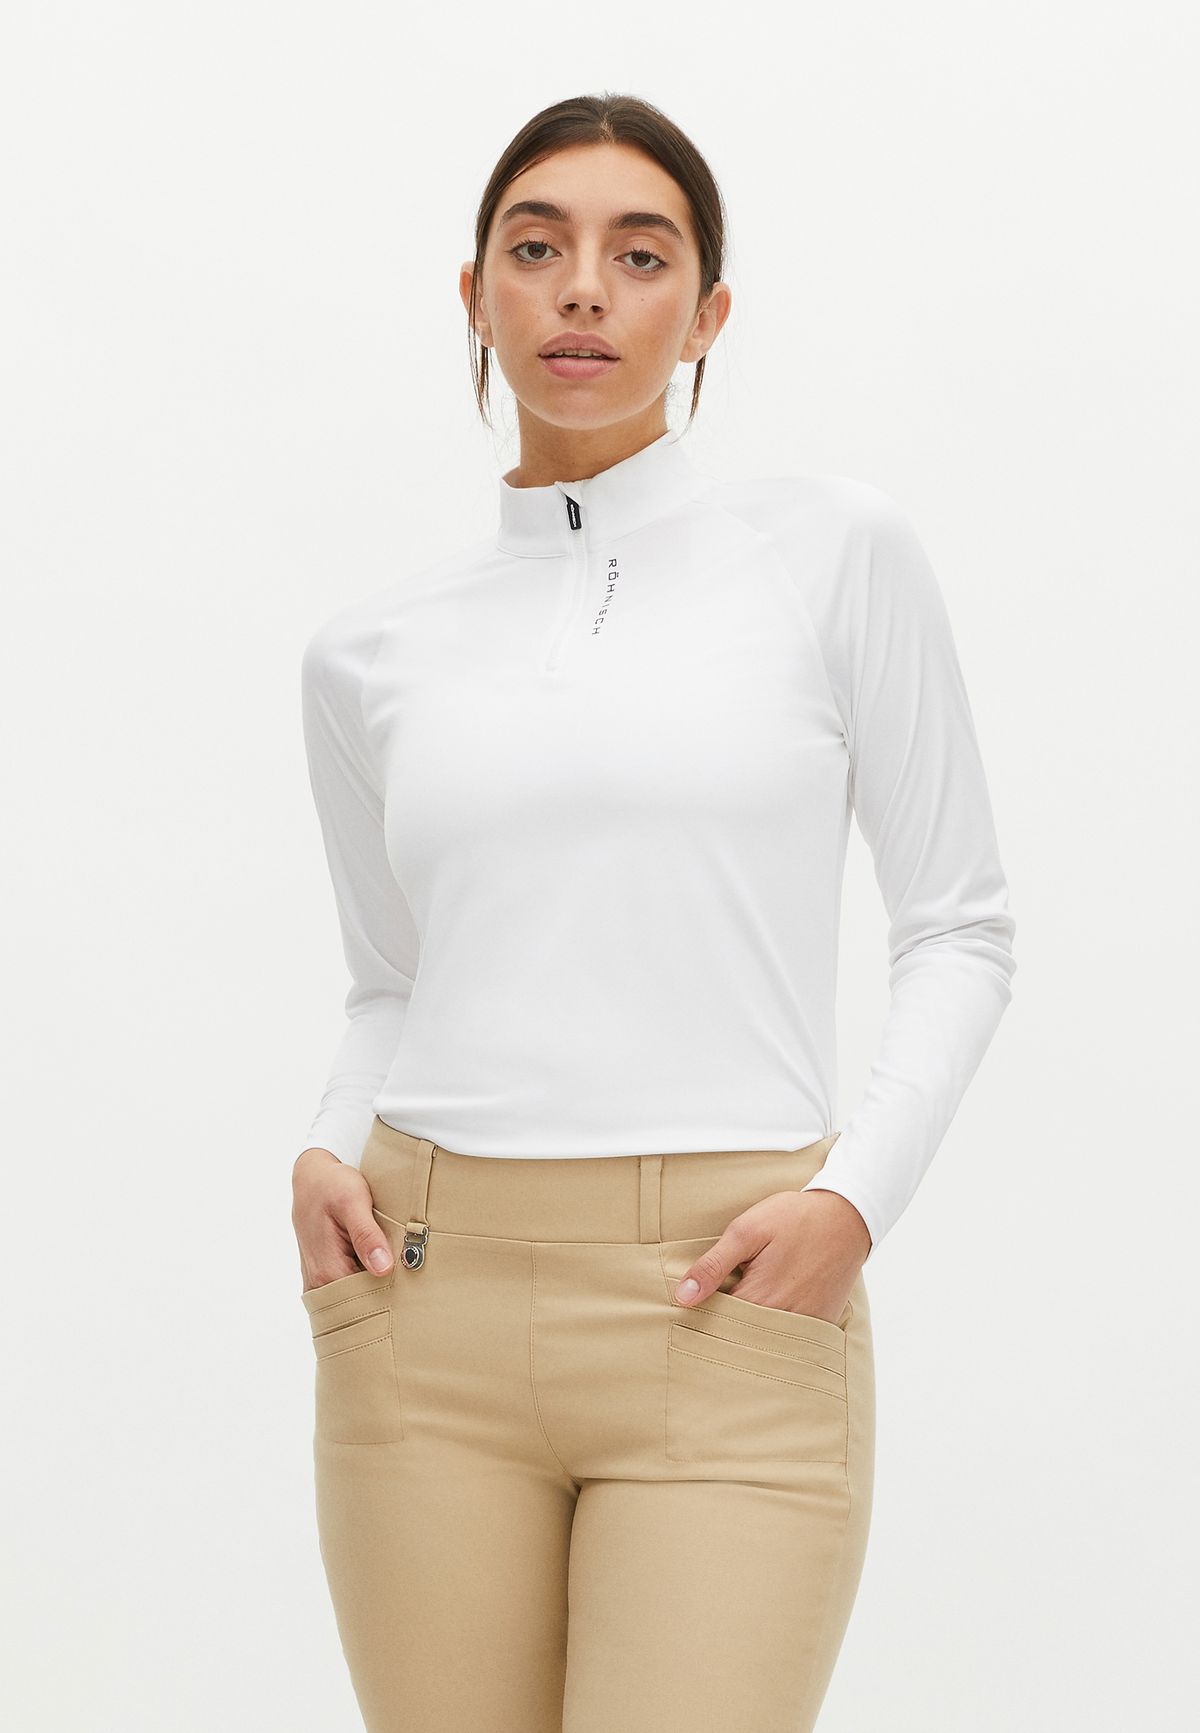 Addy Long Sleeve, White